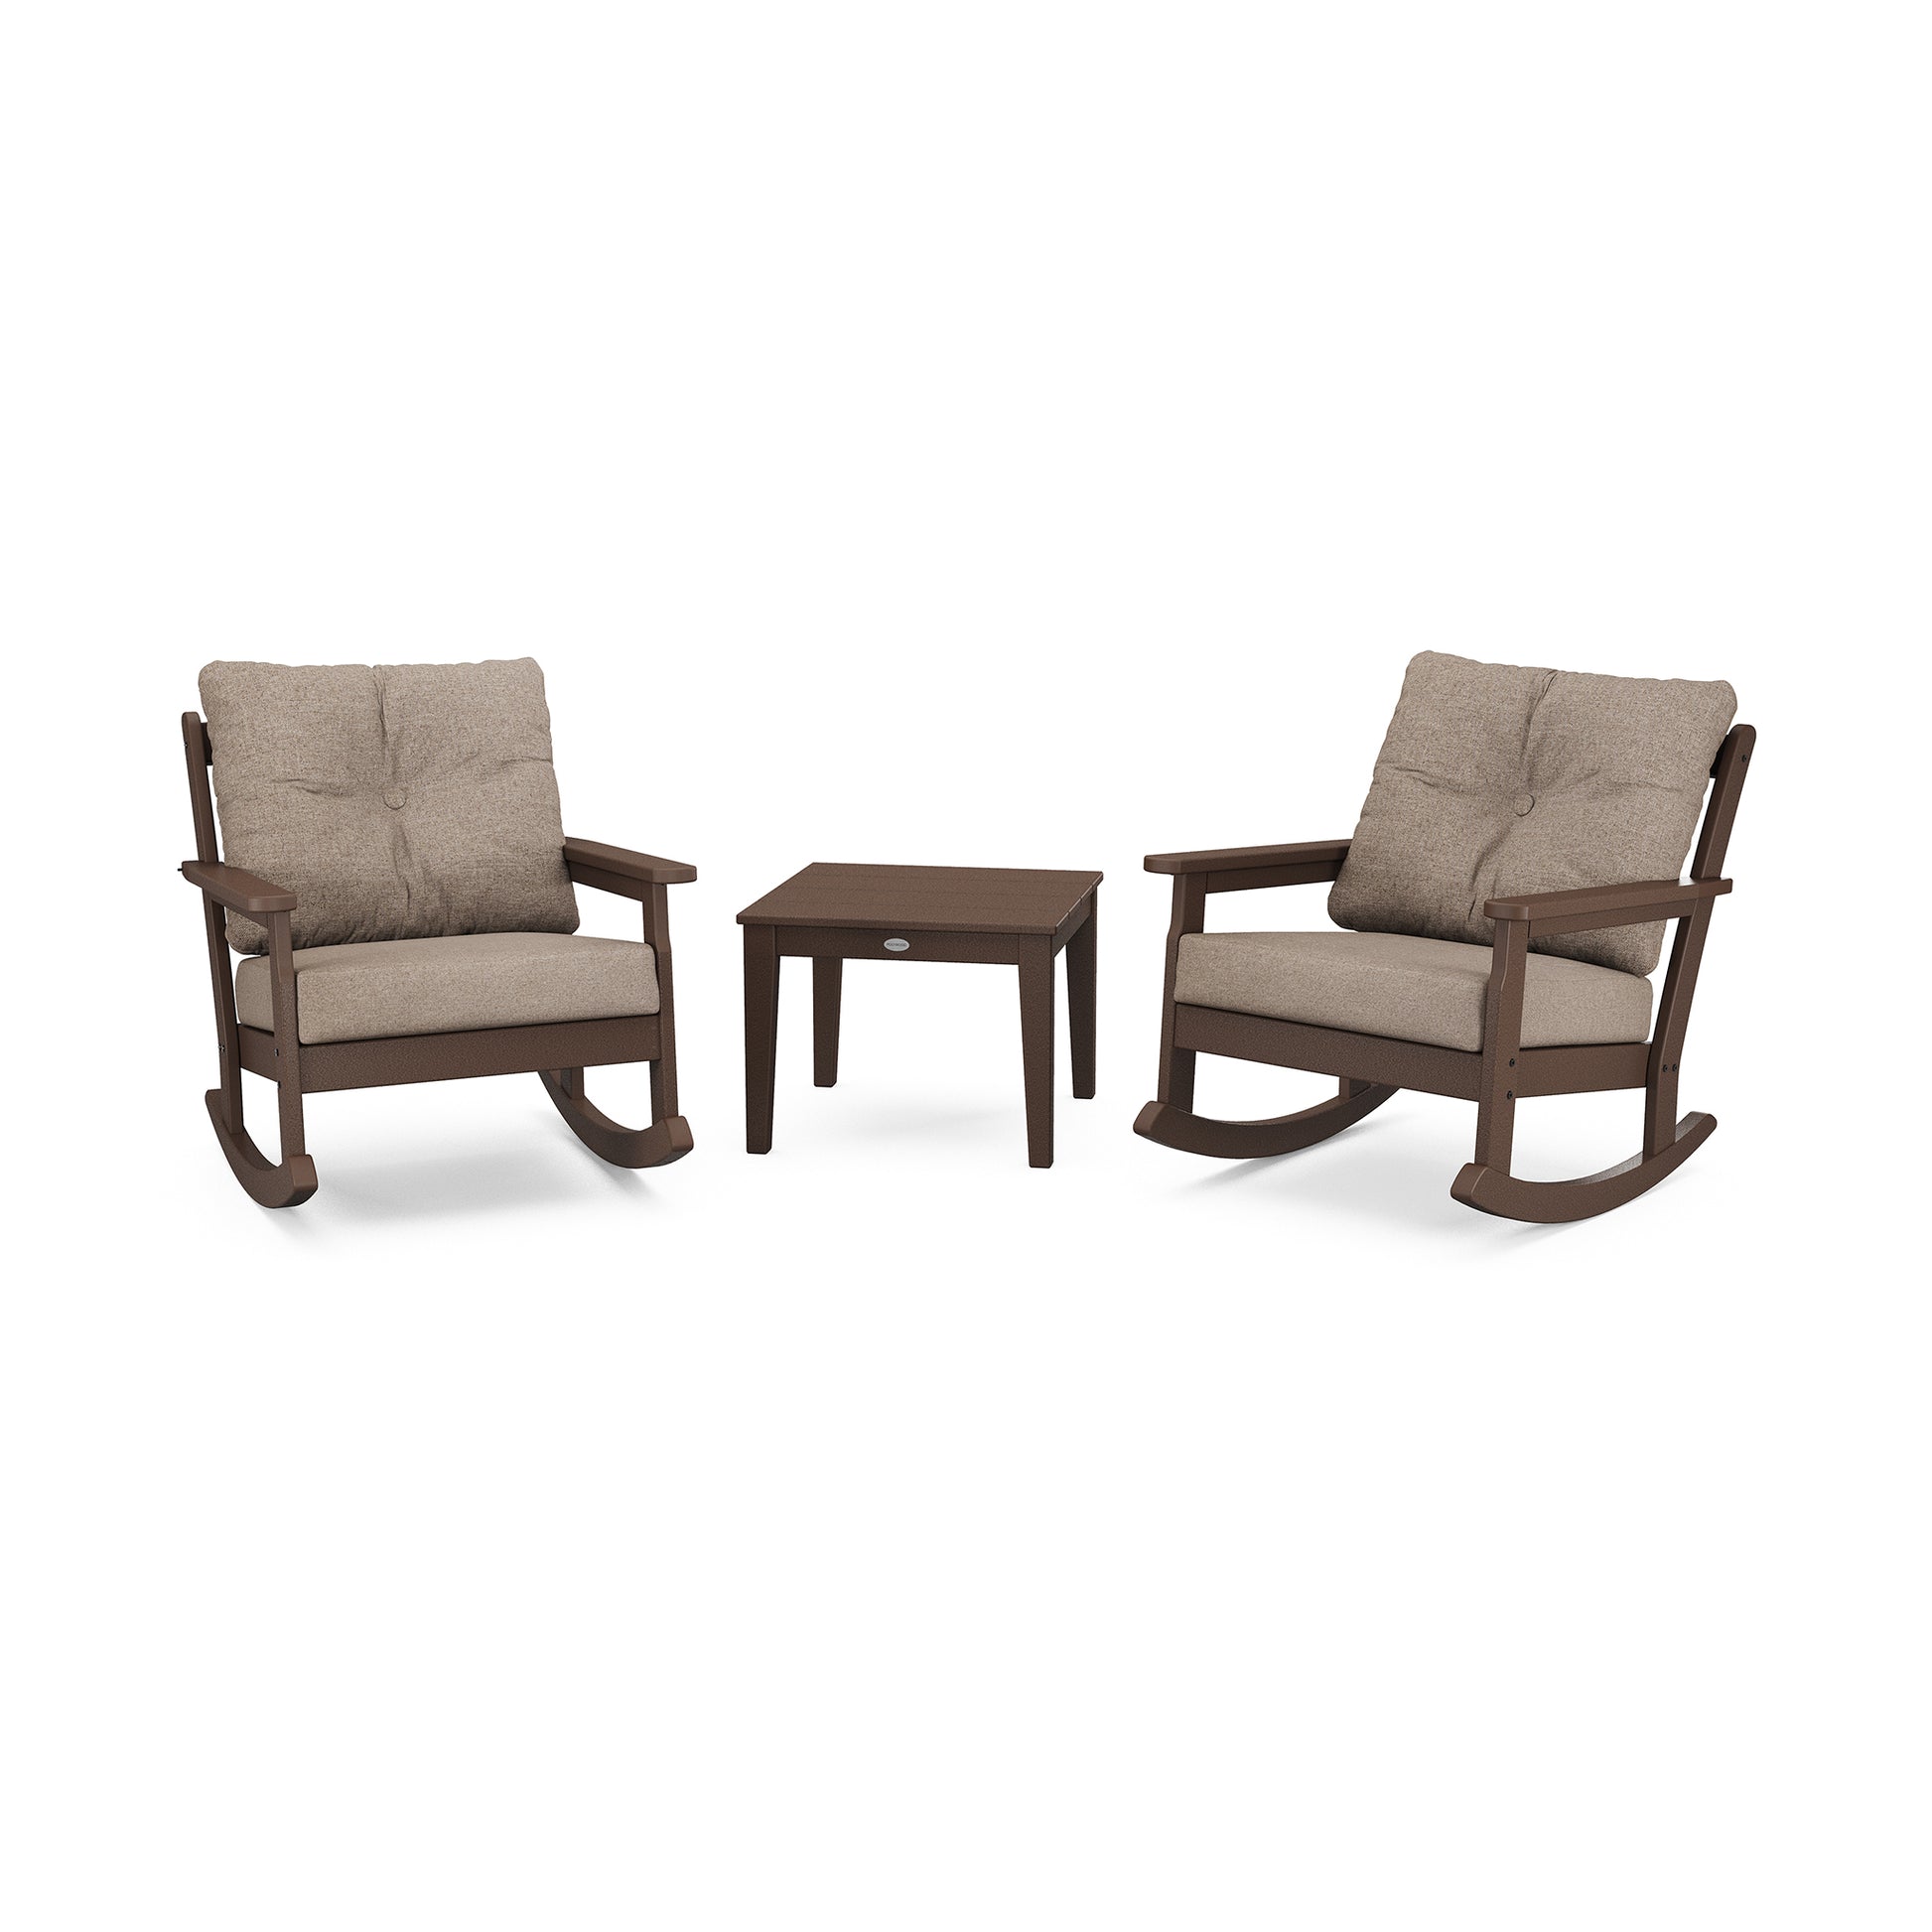 Two brown POLYWOOD Vineyard 3-Piece Deep Seating Rocker Sets with beige cushions and a small brown side table, displayed on a white background.